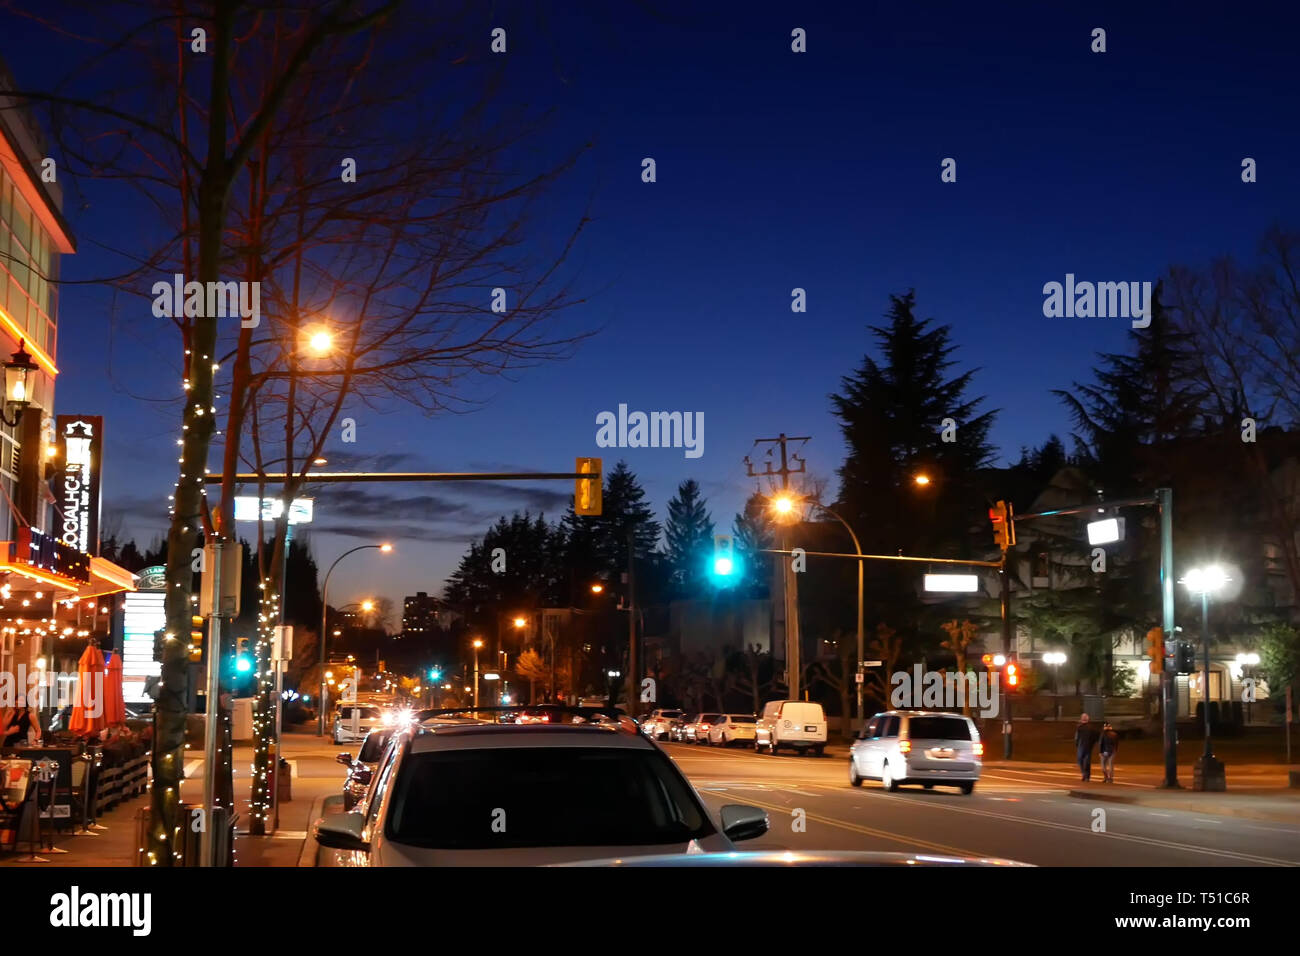 Coquitlam, BC, Canada - March 20, 2019 : Outside shot of Browns socialhouse restaurant at night Stock Photo